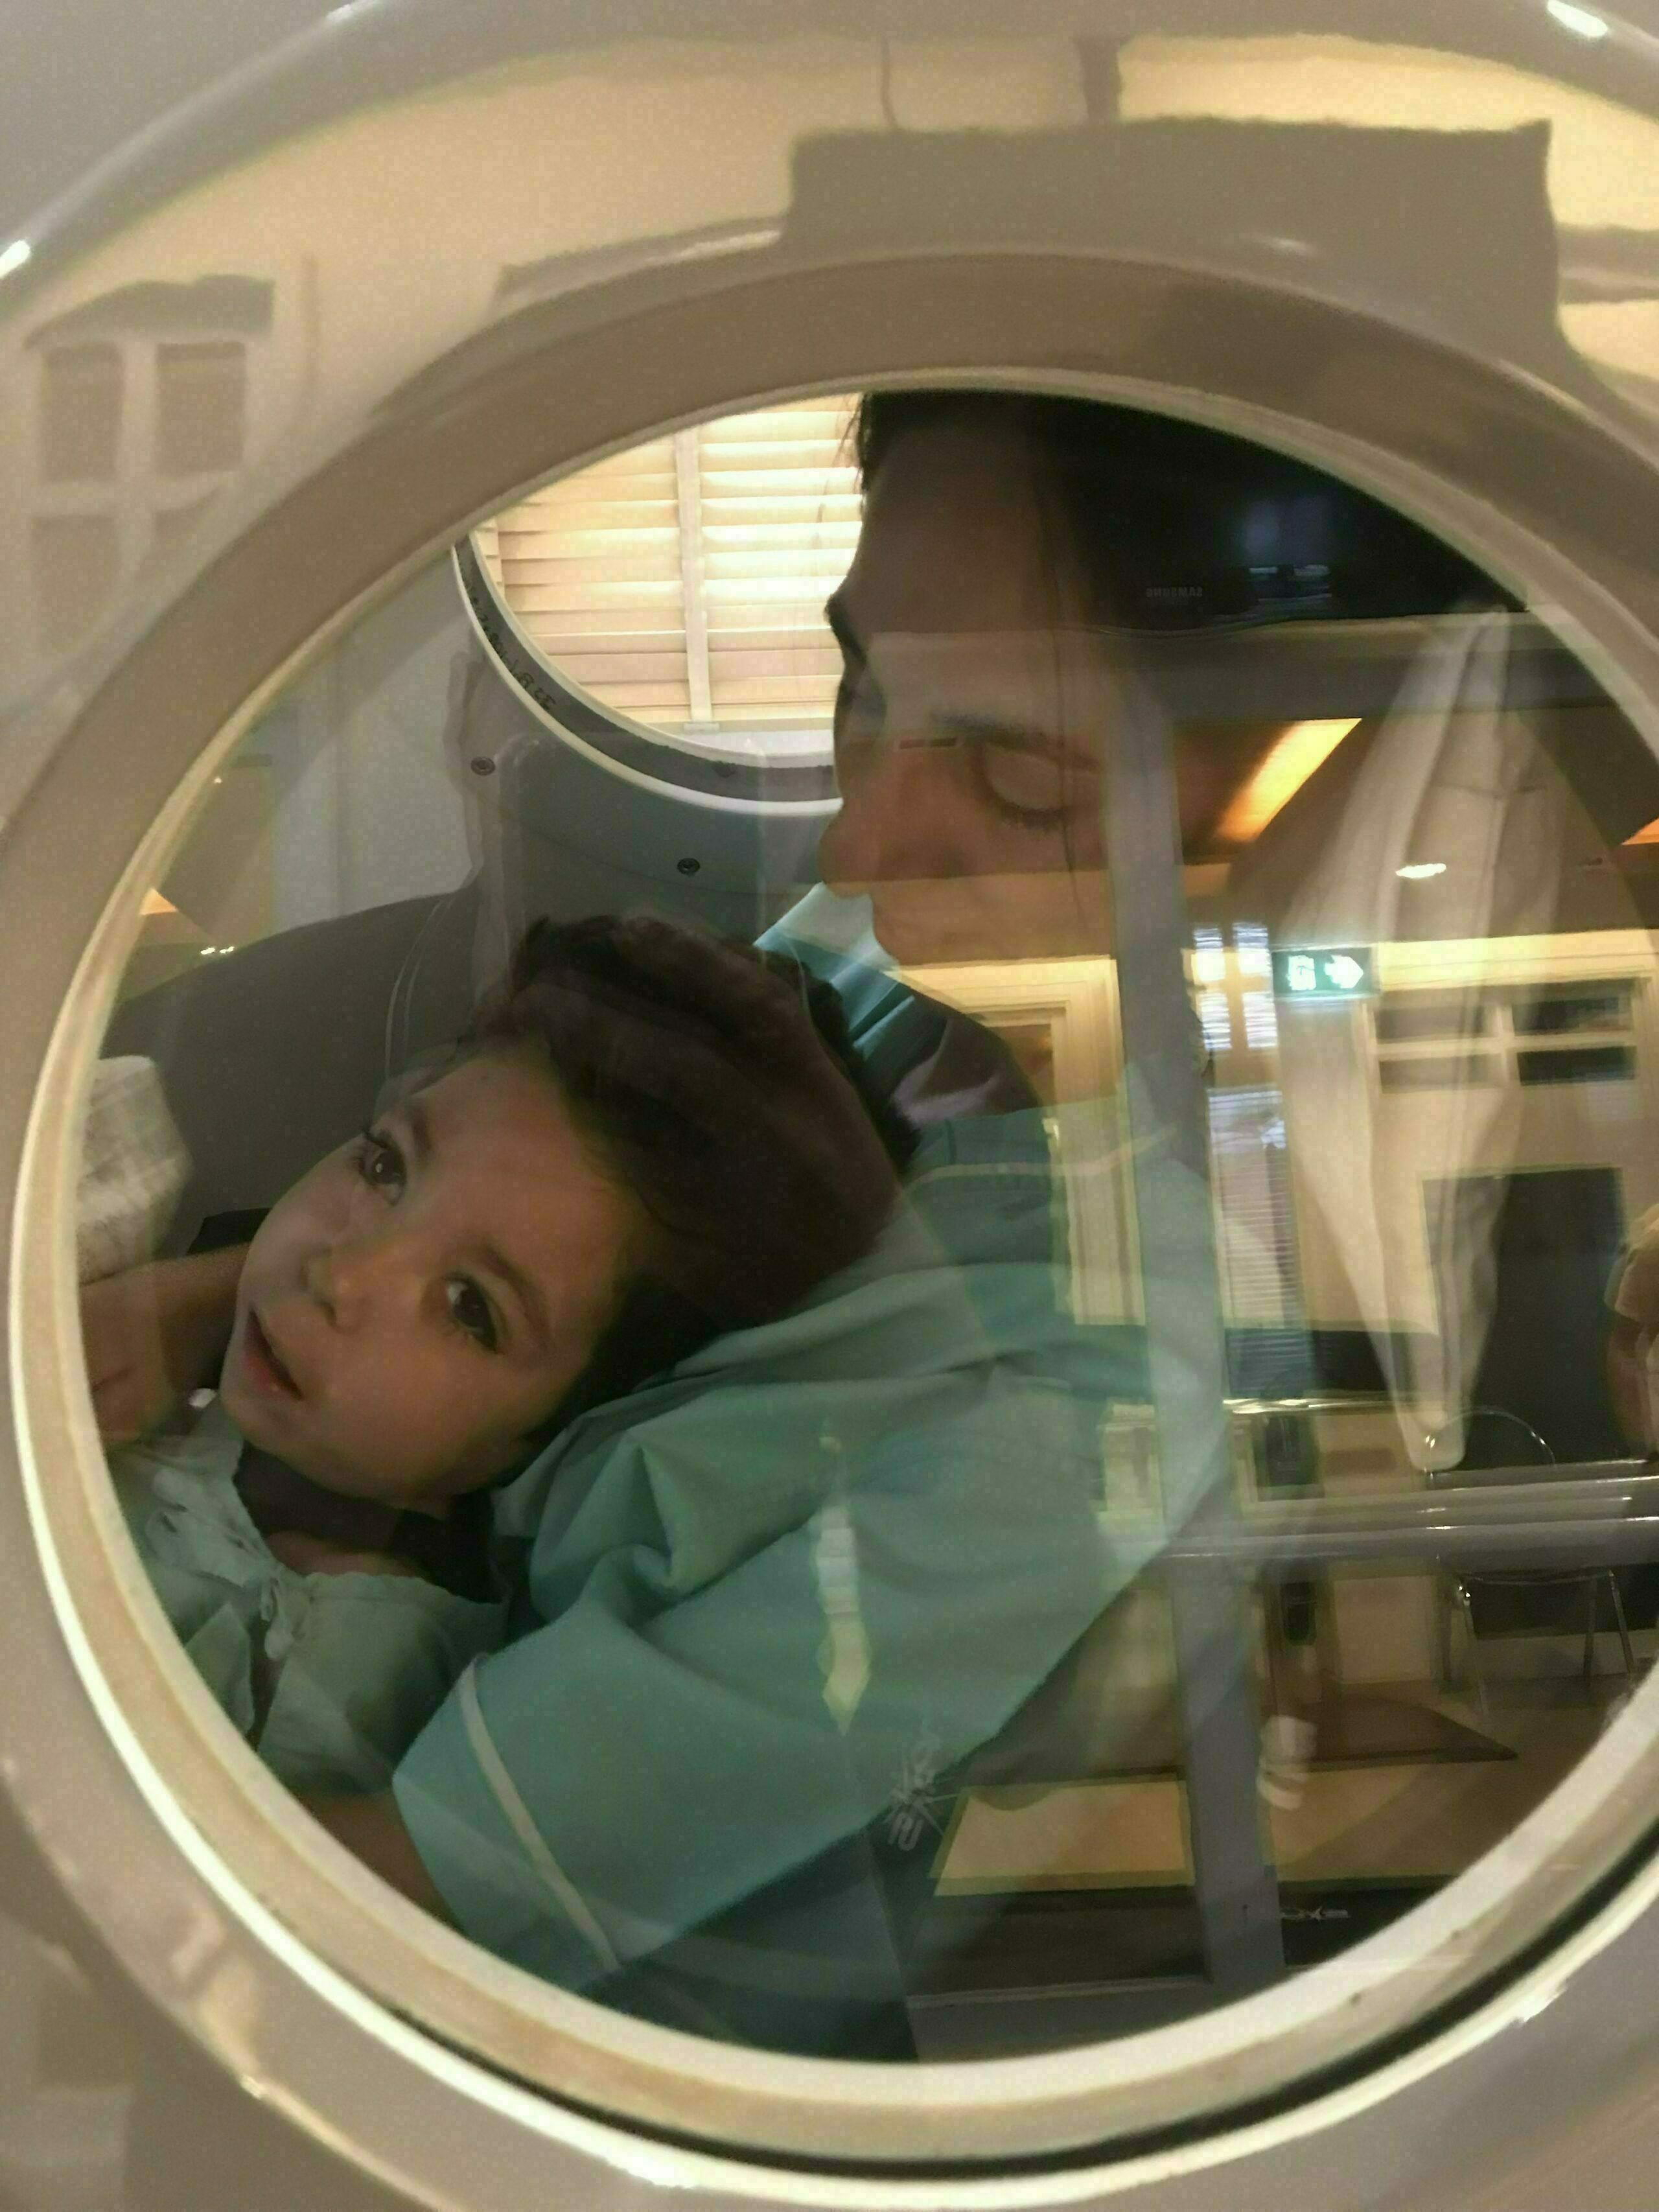 Here is an image of Samuel taking a ride in the hyperbaric oxygen therapy chamber